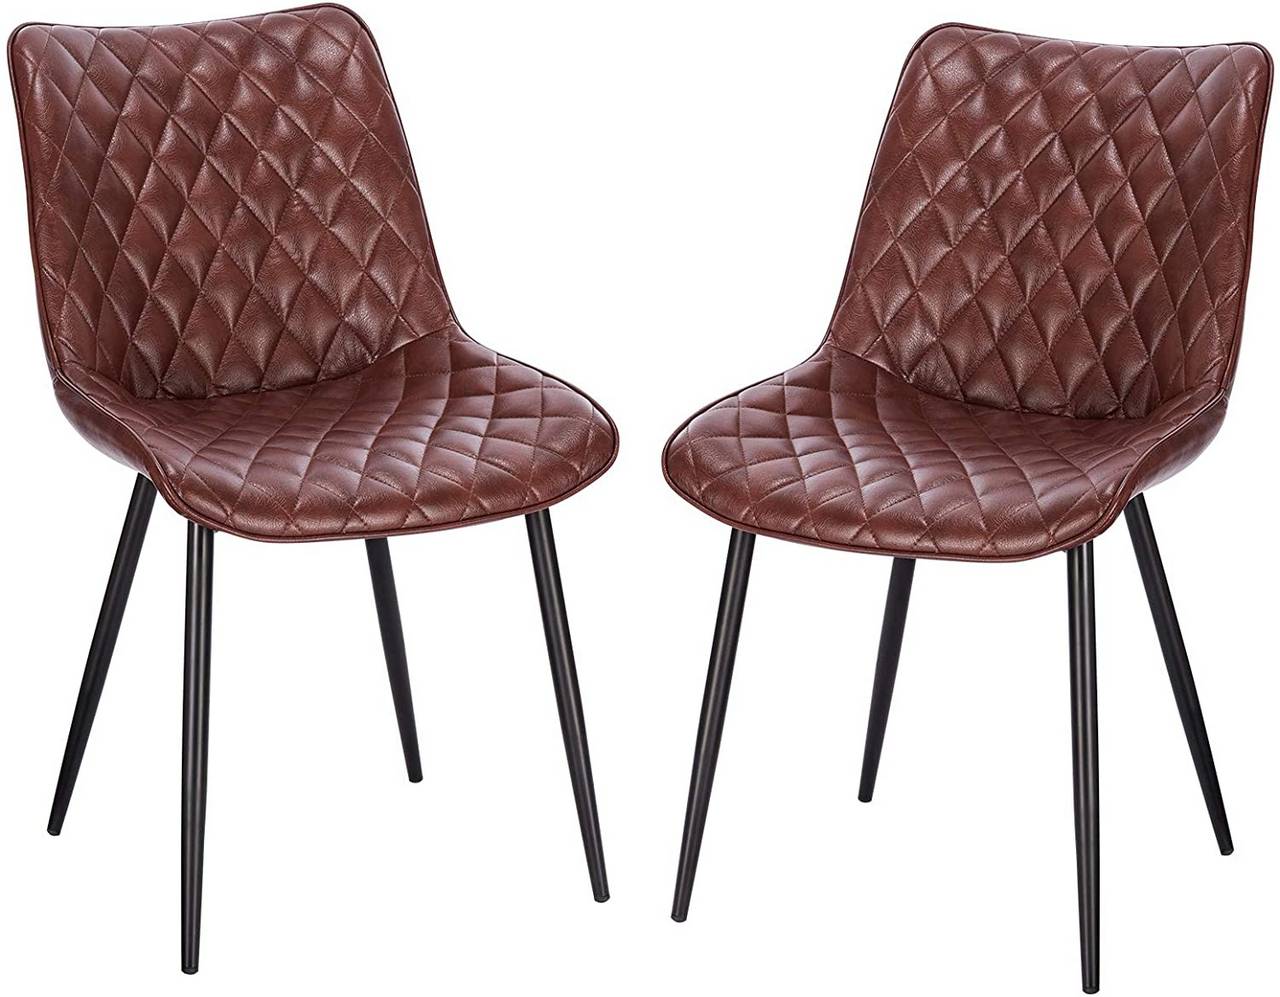 Set Of 2 Dining Chairs Made Of Synthetic Leather With Metal Legs Model Insa Woltu Eu